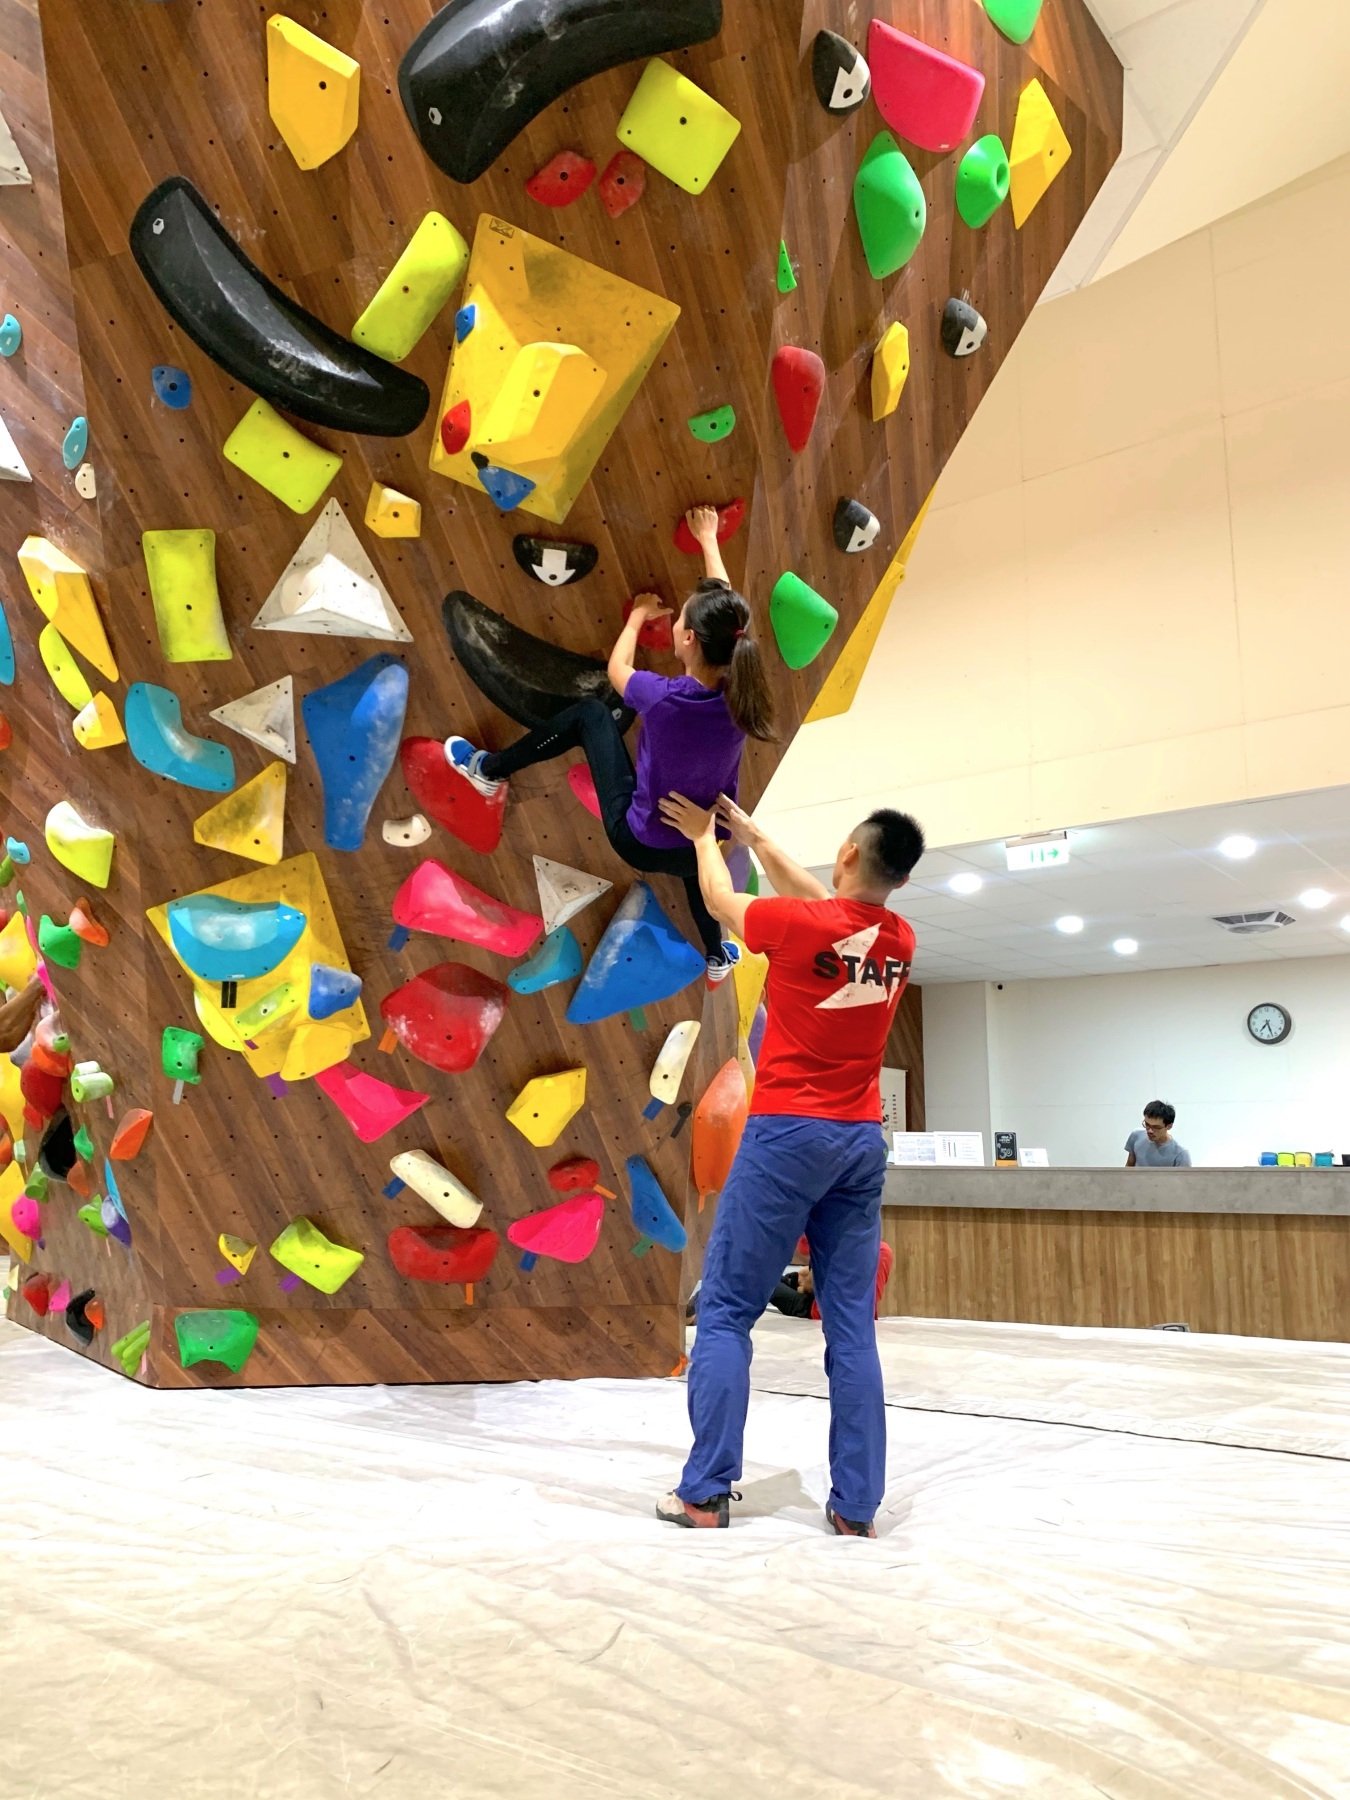 【MegaSTONE Review】The largest in the north! Challenge bouldering and climbing at Xinzhuang Climbing Hall 22